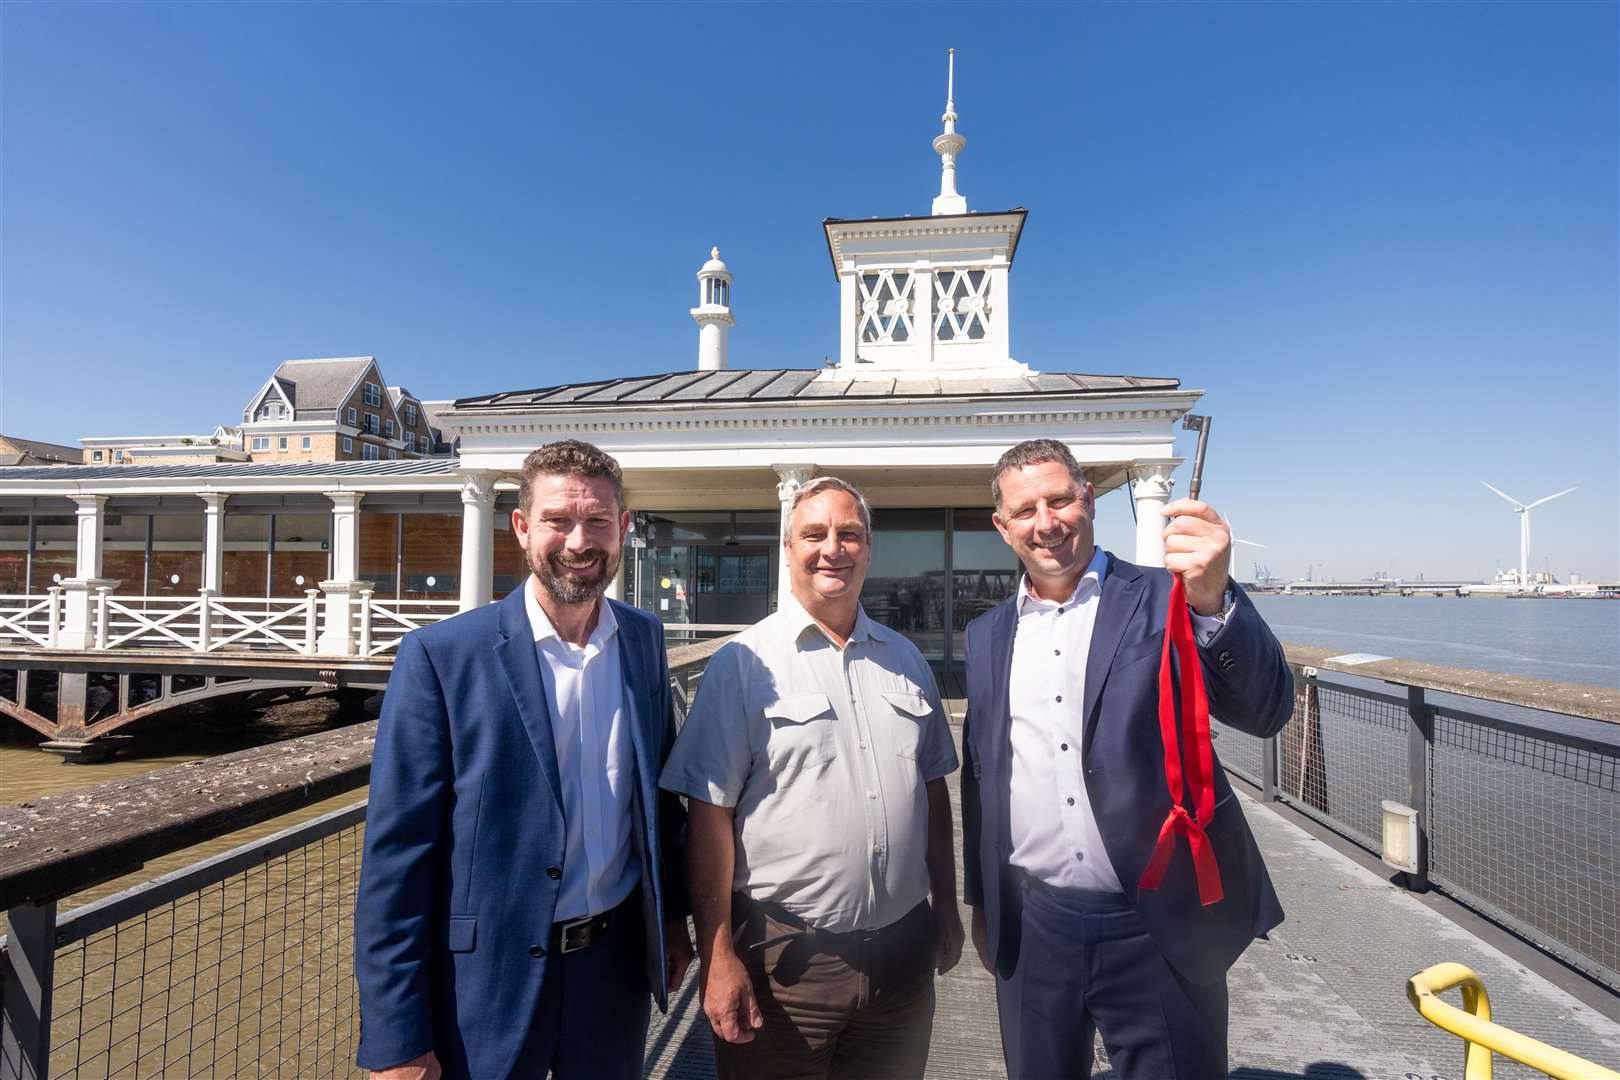 From left: Deputy chief executive of Gravesham council Nick Brown, council leader Cllr John Burden, and chief executive of Uber Boat Sean Collins. Picture: Thames Clippers